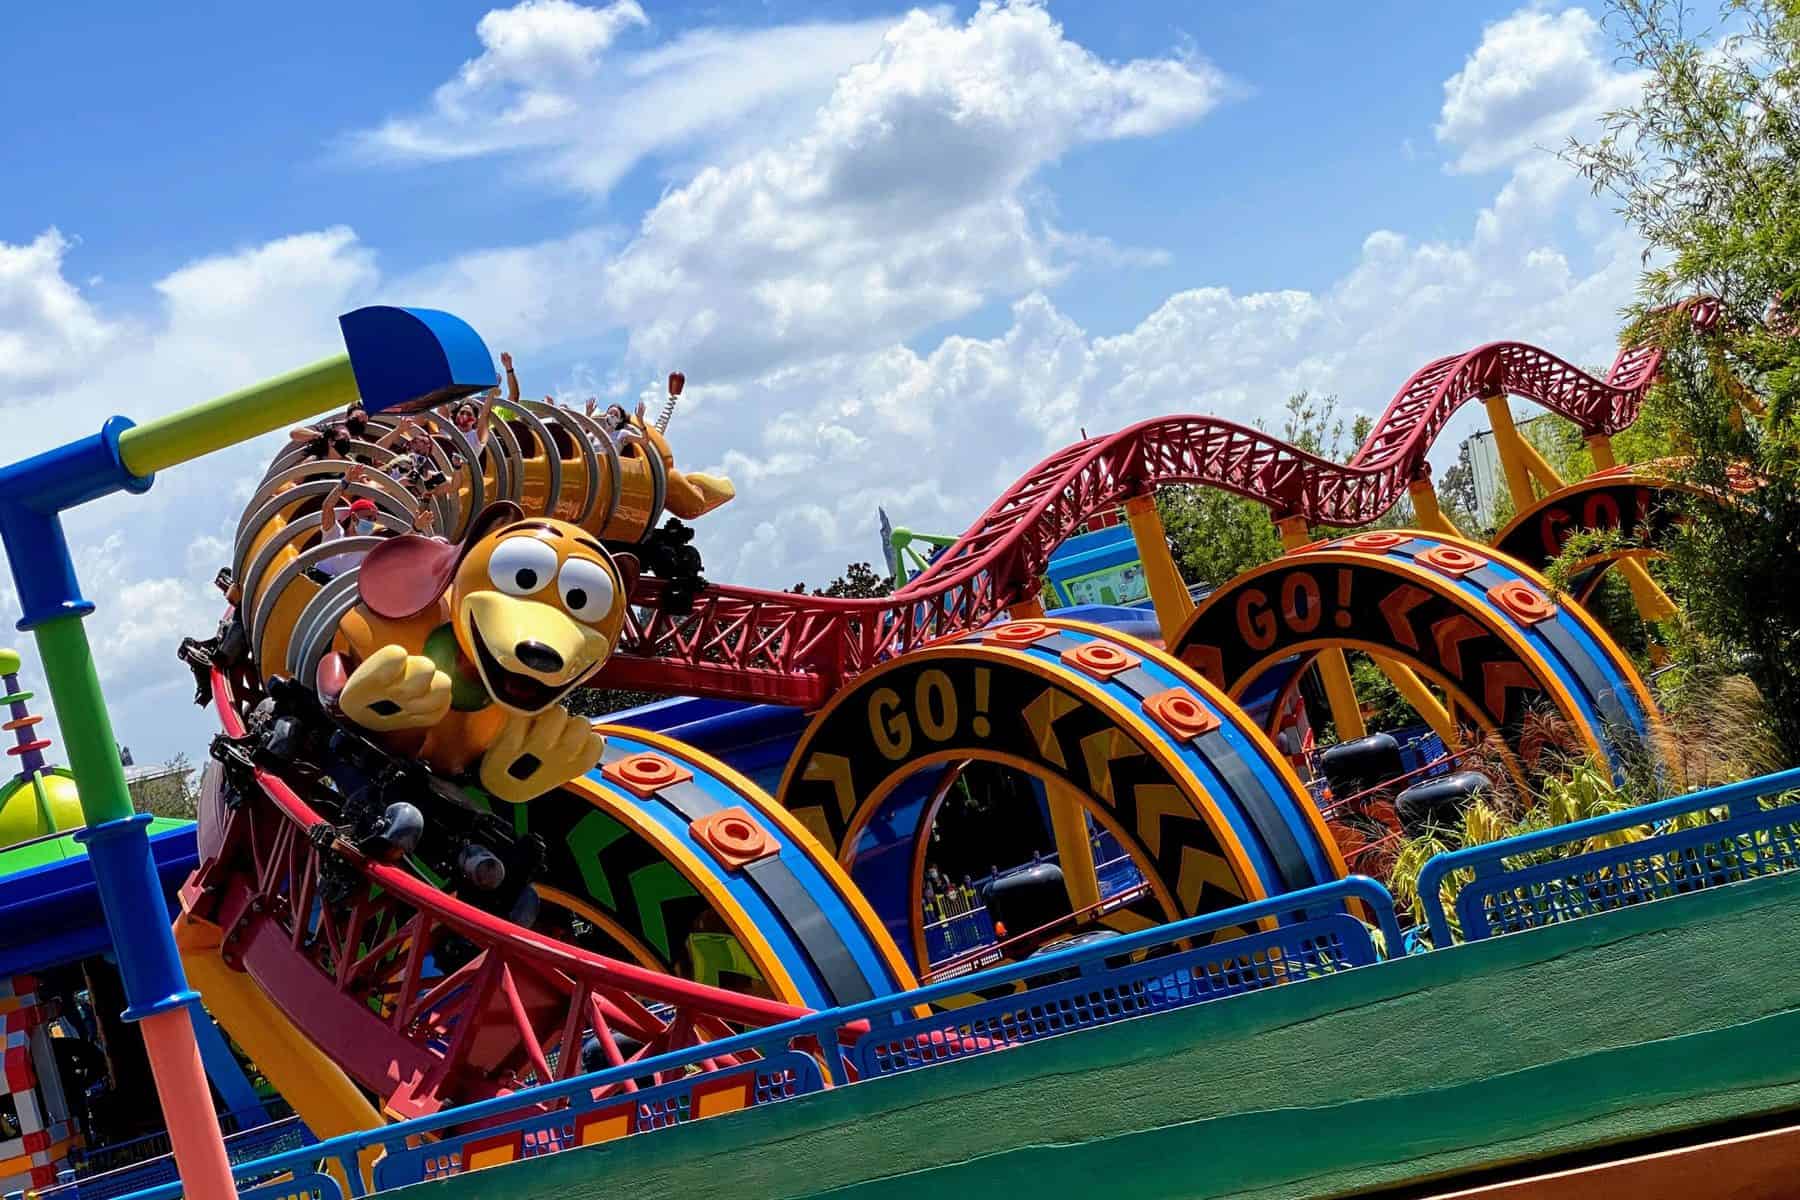 Best Roller Coasters at Disney World (ranked from least to most intense)